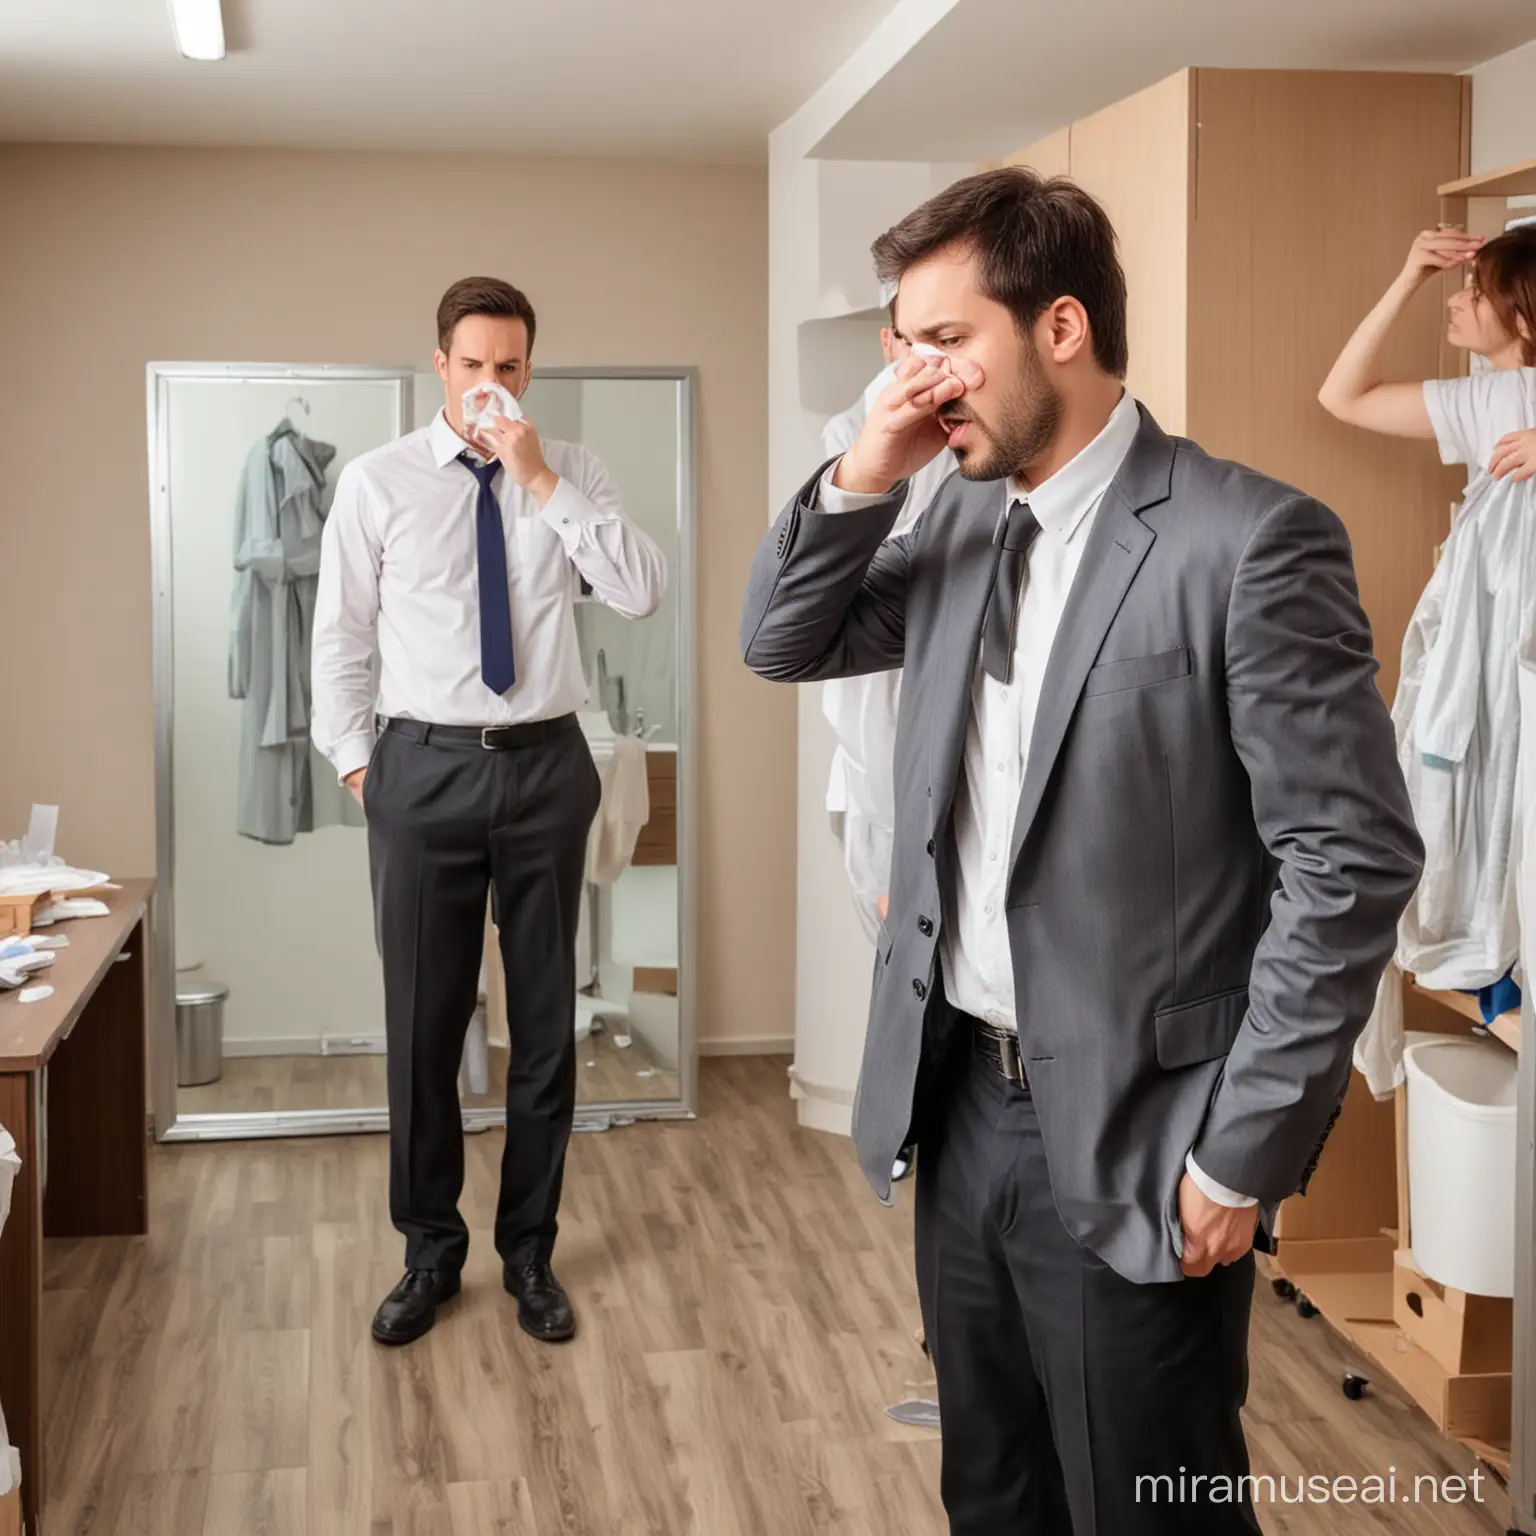 Manager in Smelly and Messy Workers Dressing Room